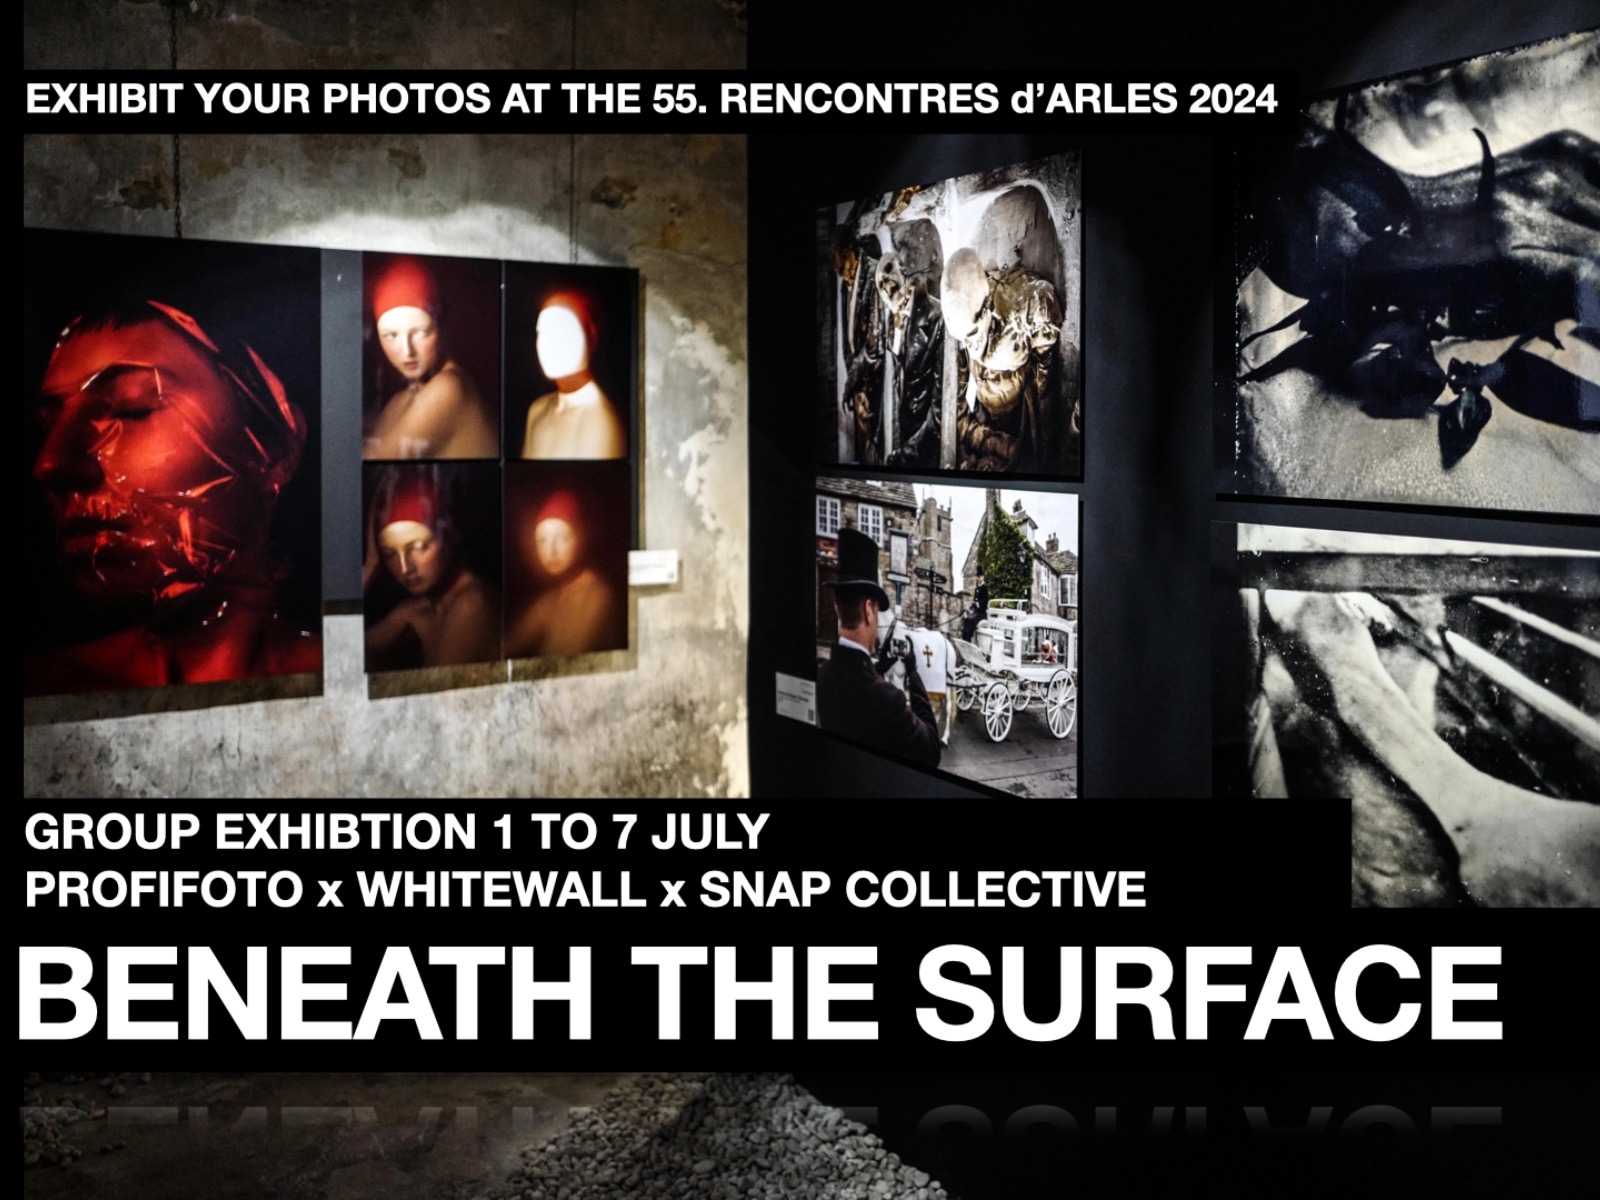 Call-for-Entries – BENEATH THE SURFACE